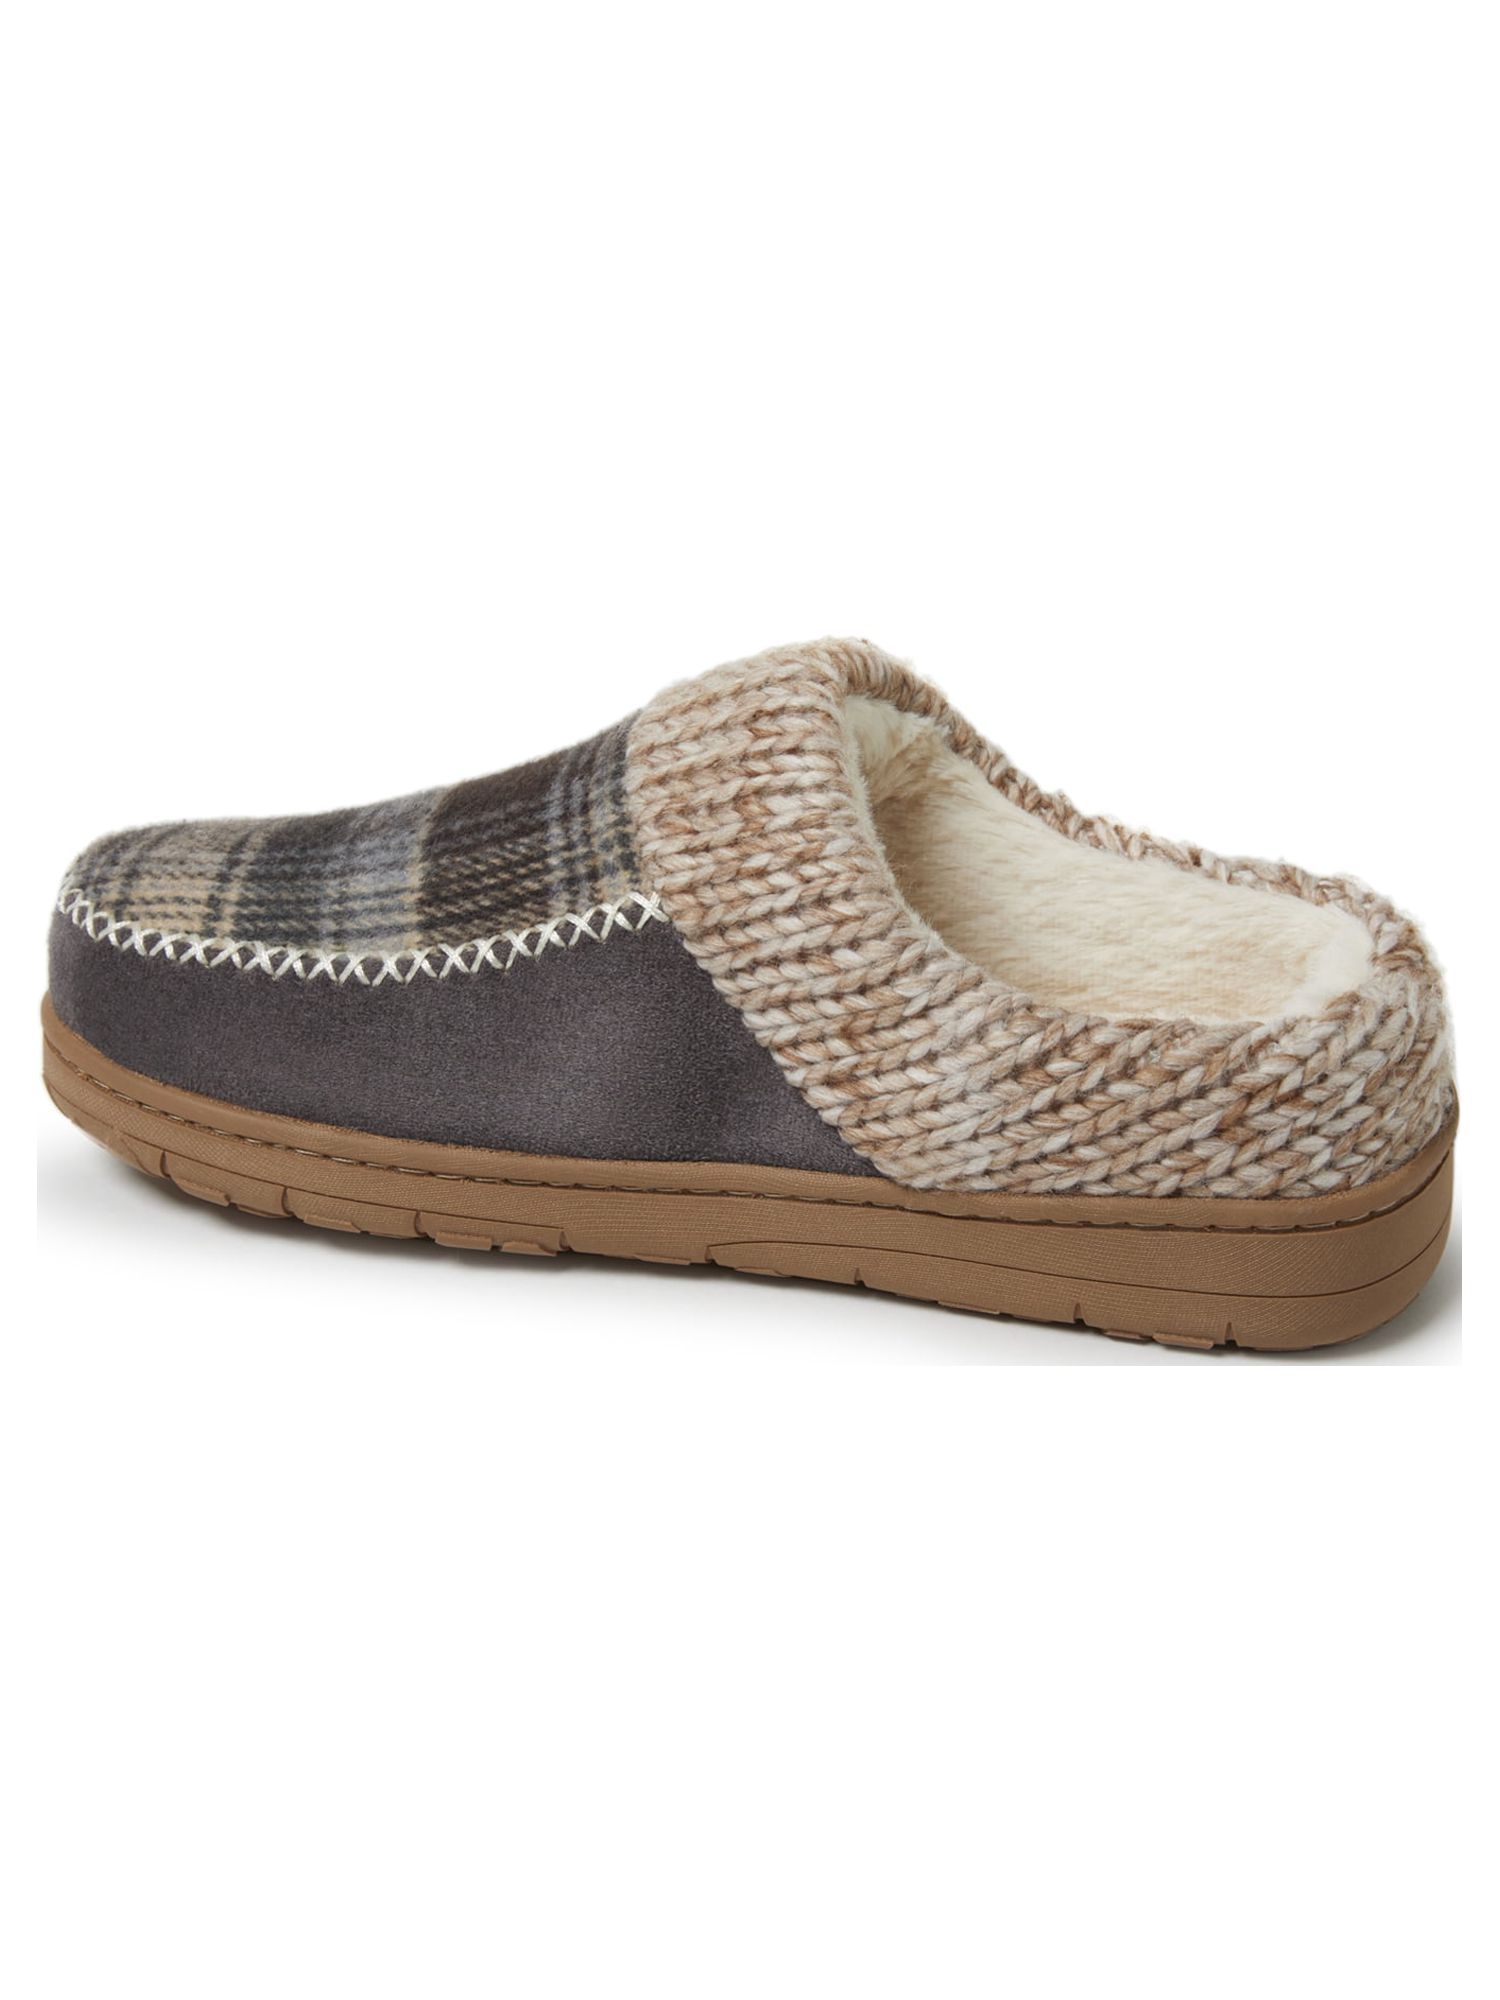 Dearfoams Cozy Comfort Women's Moc Toe Clog Slippers with Chunky Knit Collar - image 4 of 7